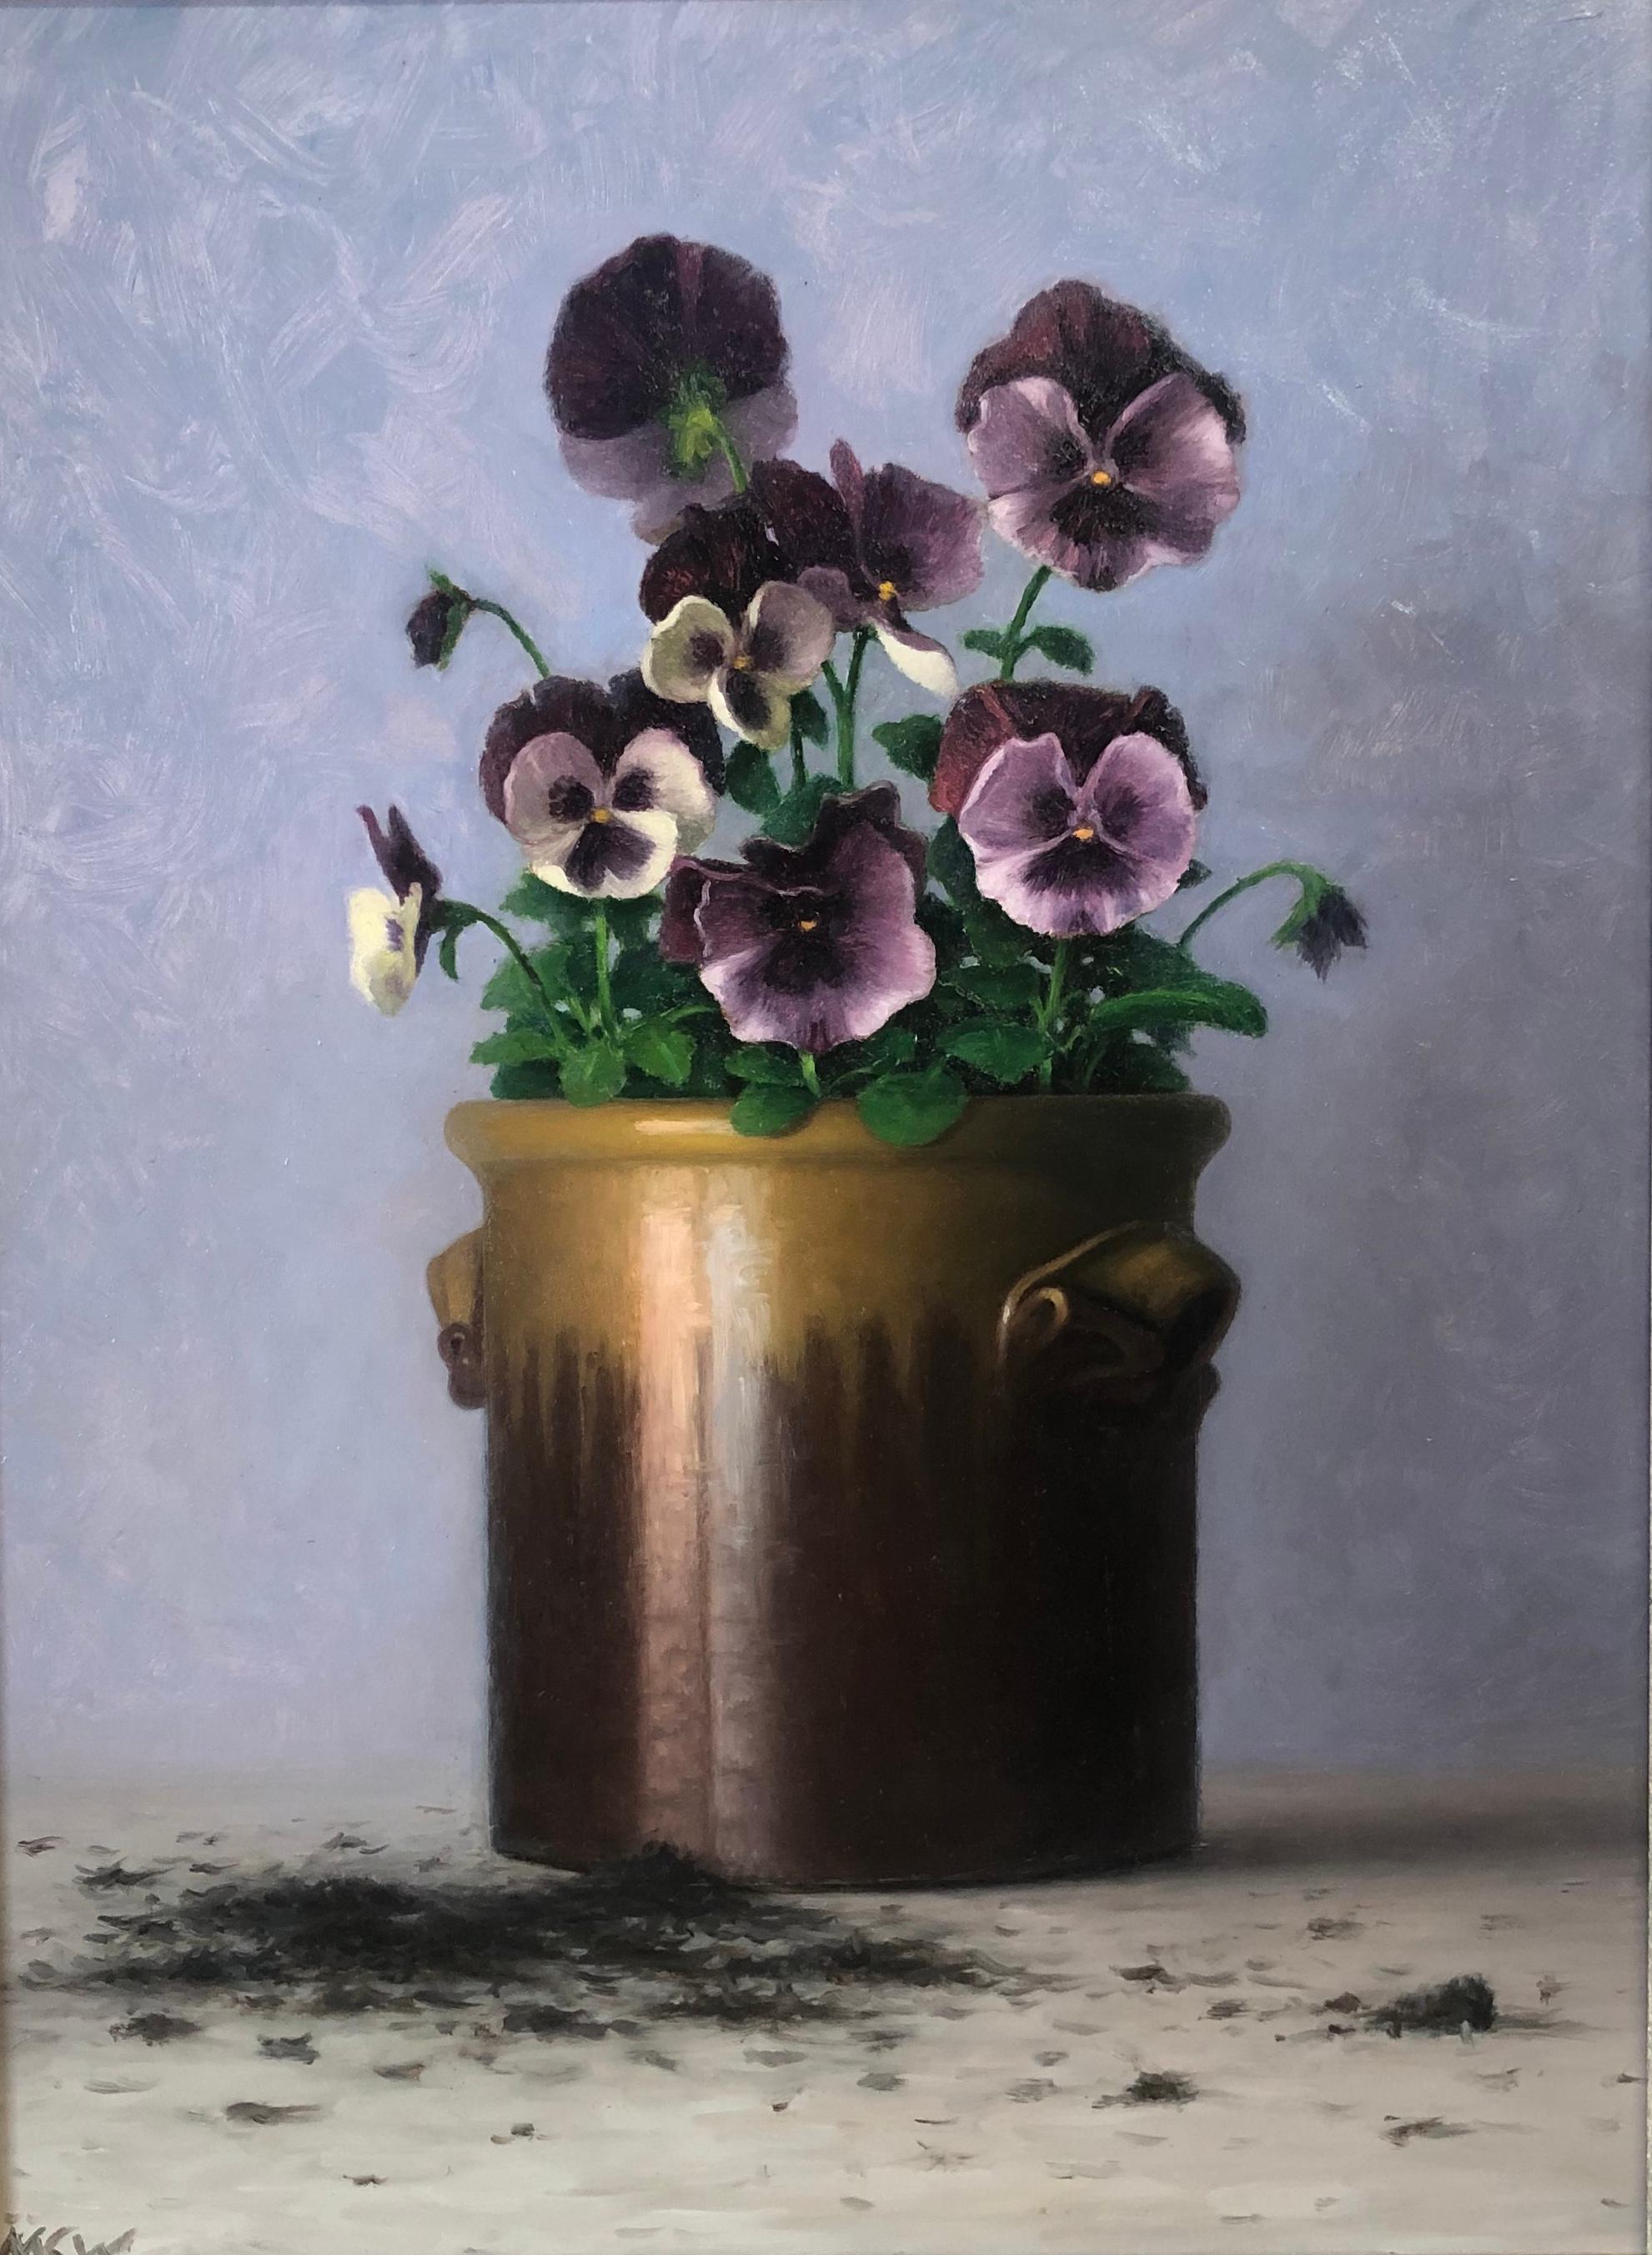 Matthew Weigle Portrait Painting - Pansies and Spilled Dirt - Oil painting, by Contemporary American Realist